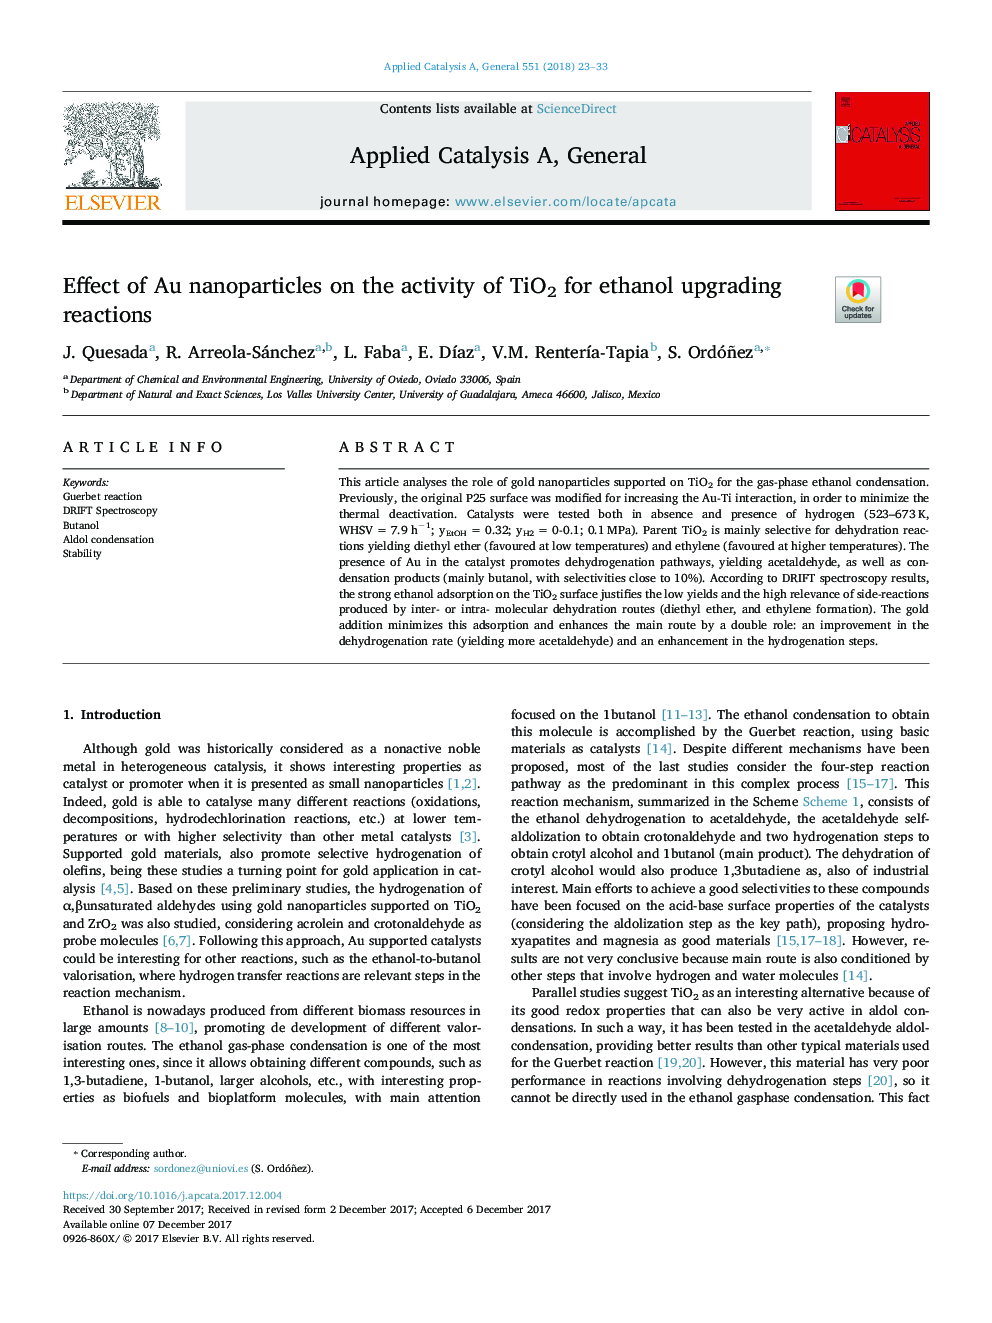 Effect of Au nanoparticles on the activity of TiO2 for ethanol upgrading reactions